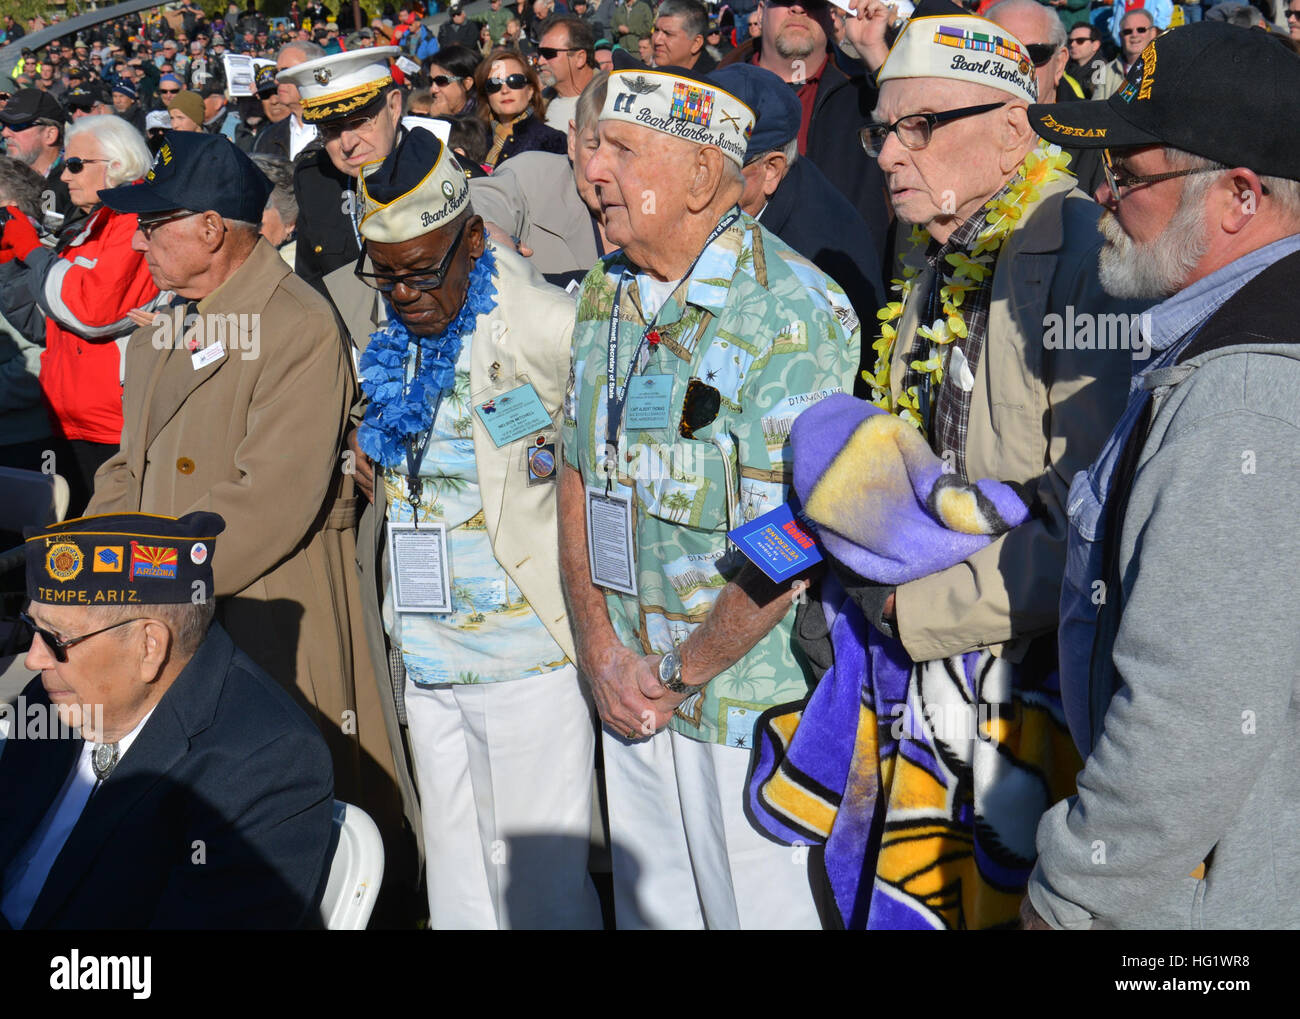 Three of the nine living survivors of the USS Arizona, all in their nineties, are honored during a WWII memorial ceremony in Phoenix on Saturday, the 72nd anniversary of the attack on Pearl Harbor in Hawaii. The memorial features nine blue steel columns and gun barrels salvaged from two famed battleships, the USS Arizona and the USS Missouri. (U.S. Navy photo by Mass Communications Specialist 3rd Class Drew Verbis/Released) WWII, USS Arizona Memorial dedication in Phoenix 131207-N-AS200-023 Stock Photo